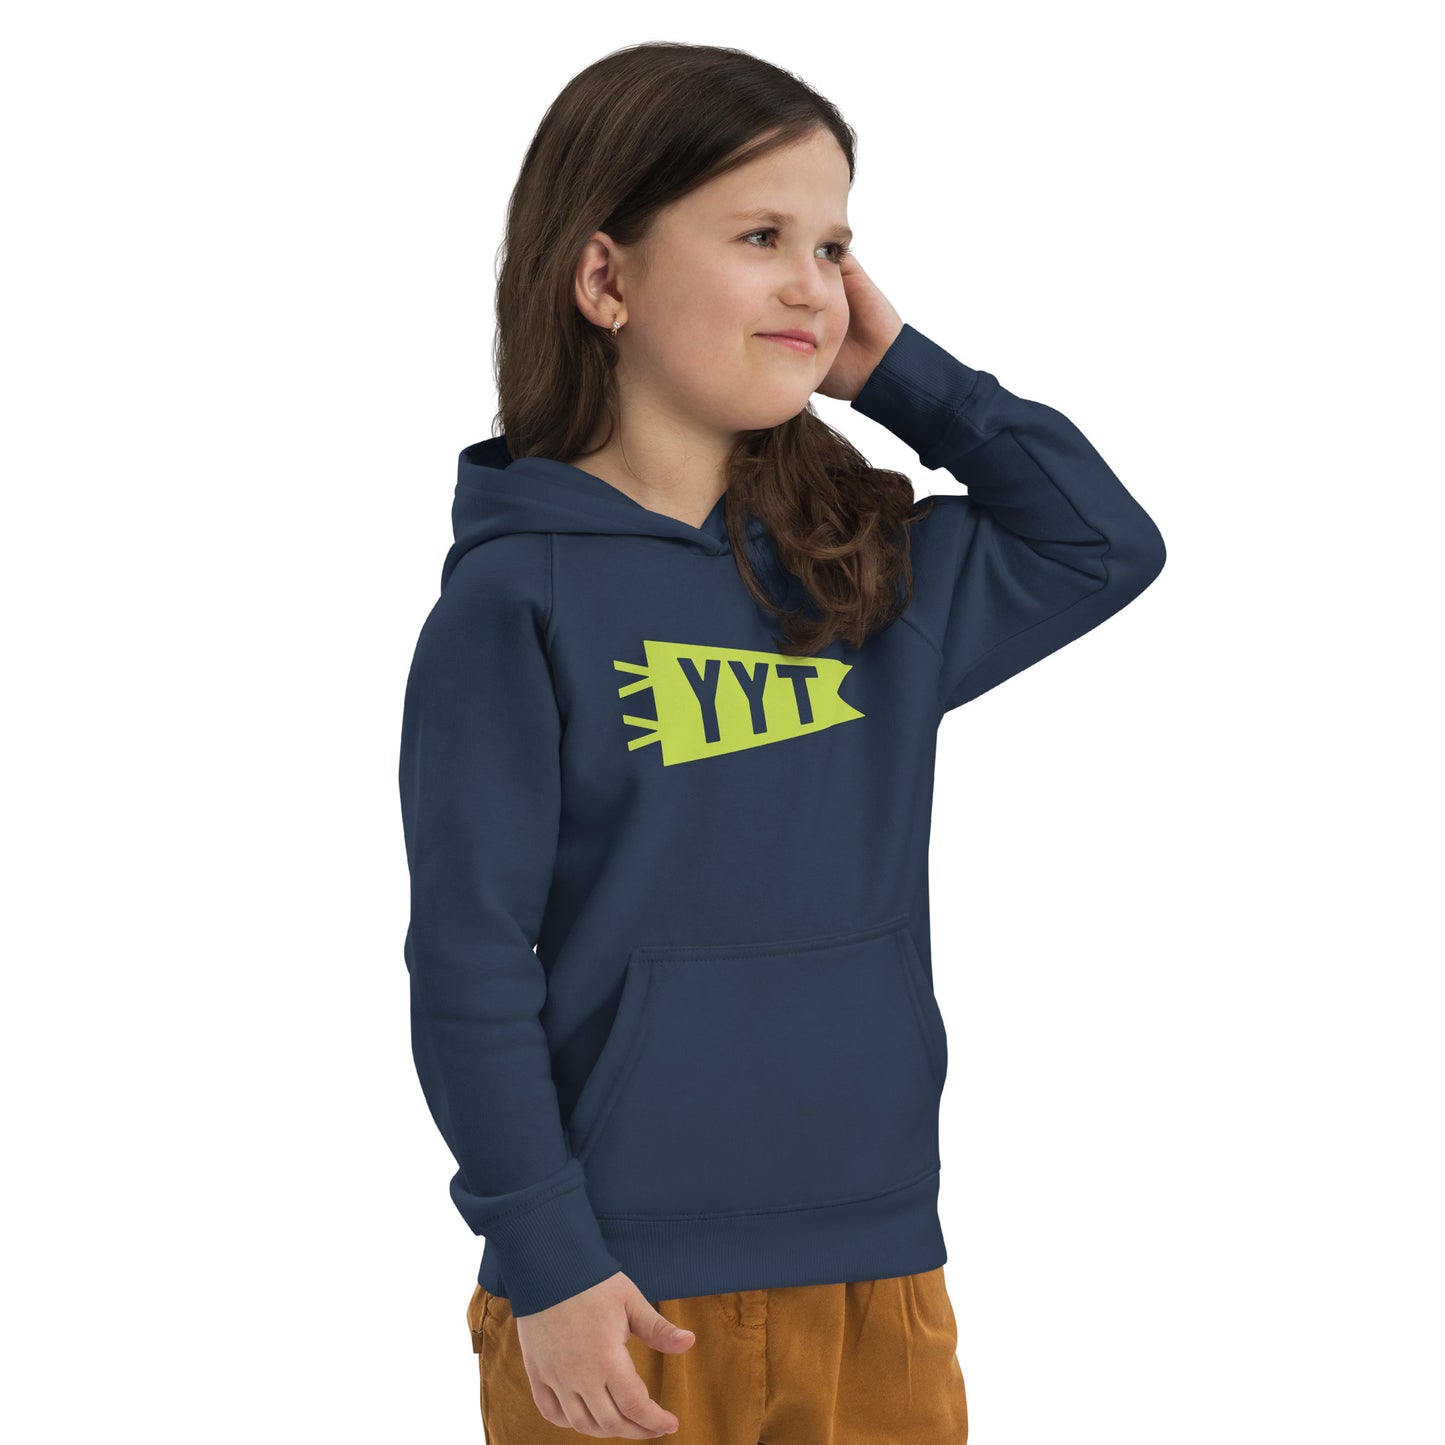 Kid's Sustainable Hoodie - Green Graphic • YYT St. John's • YHM Designs - Image 06